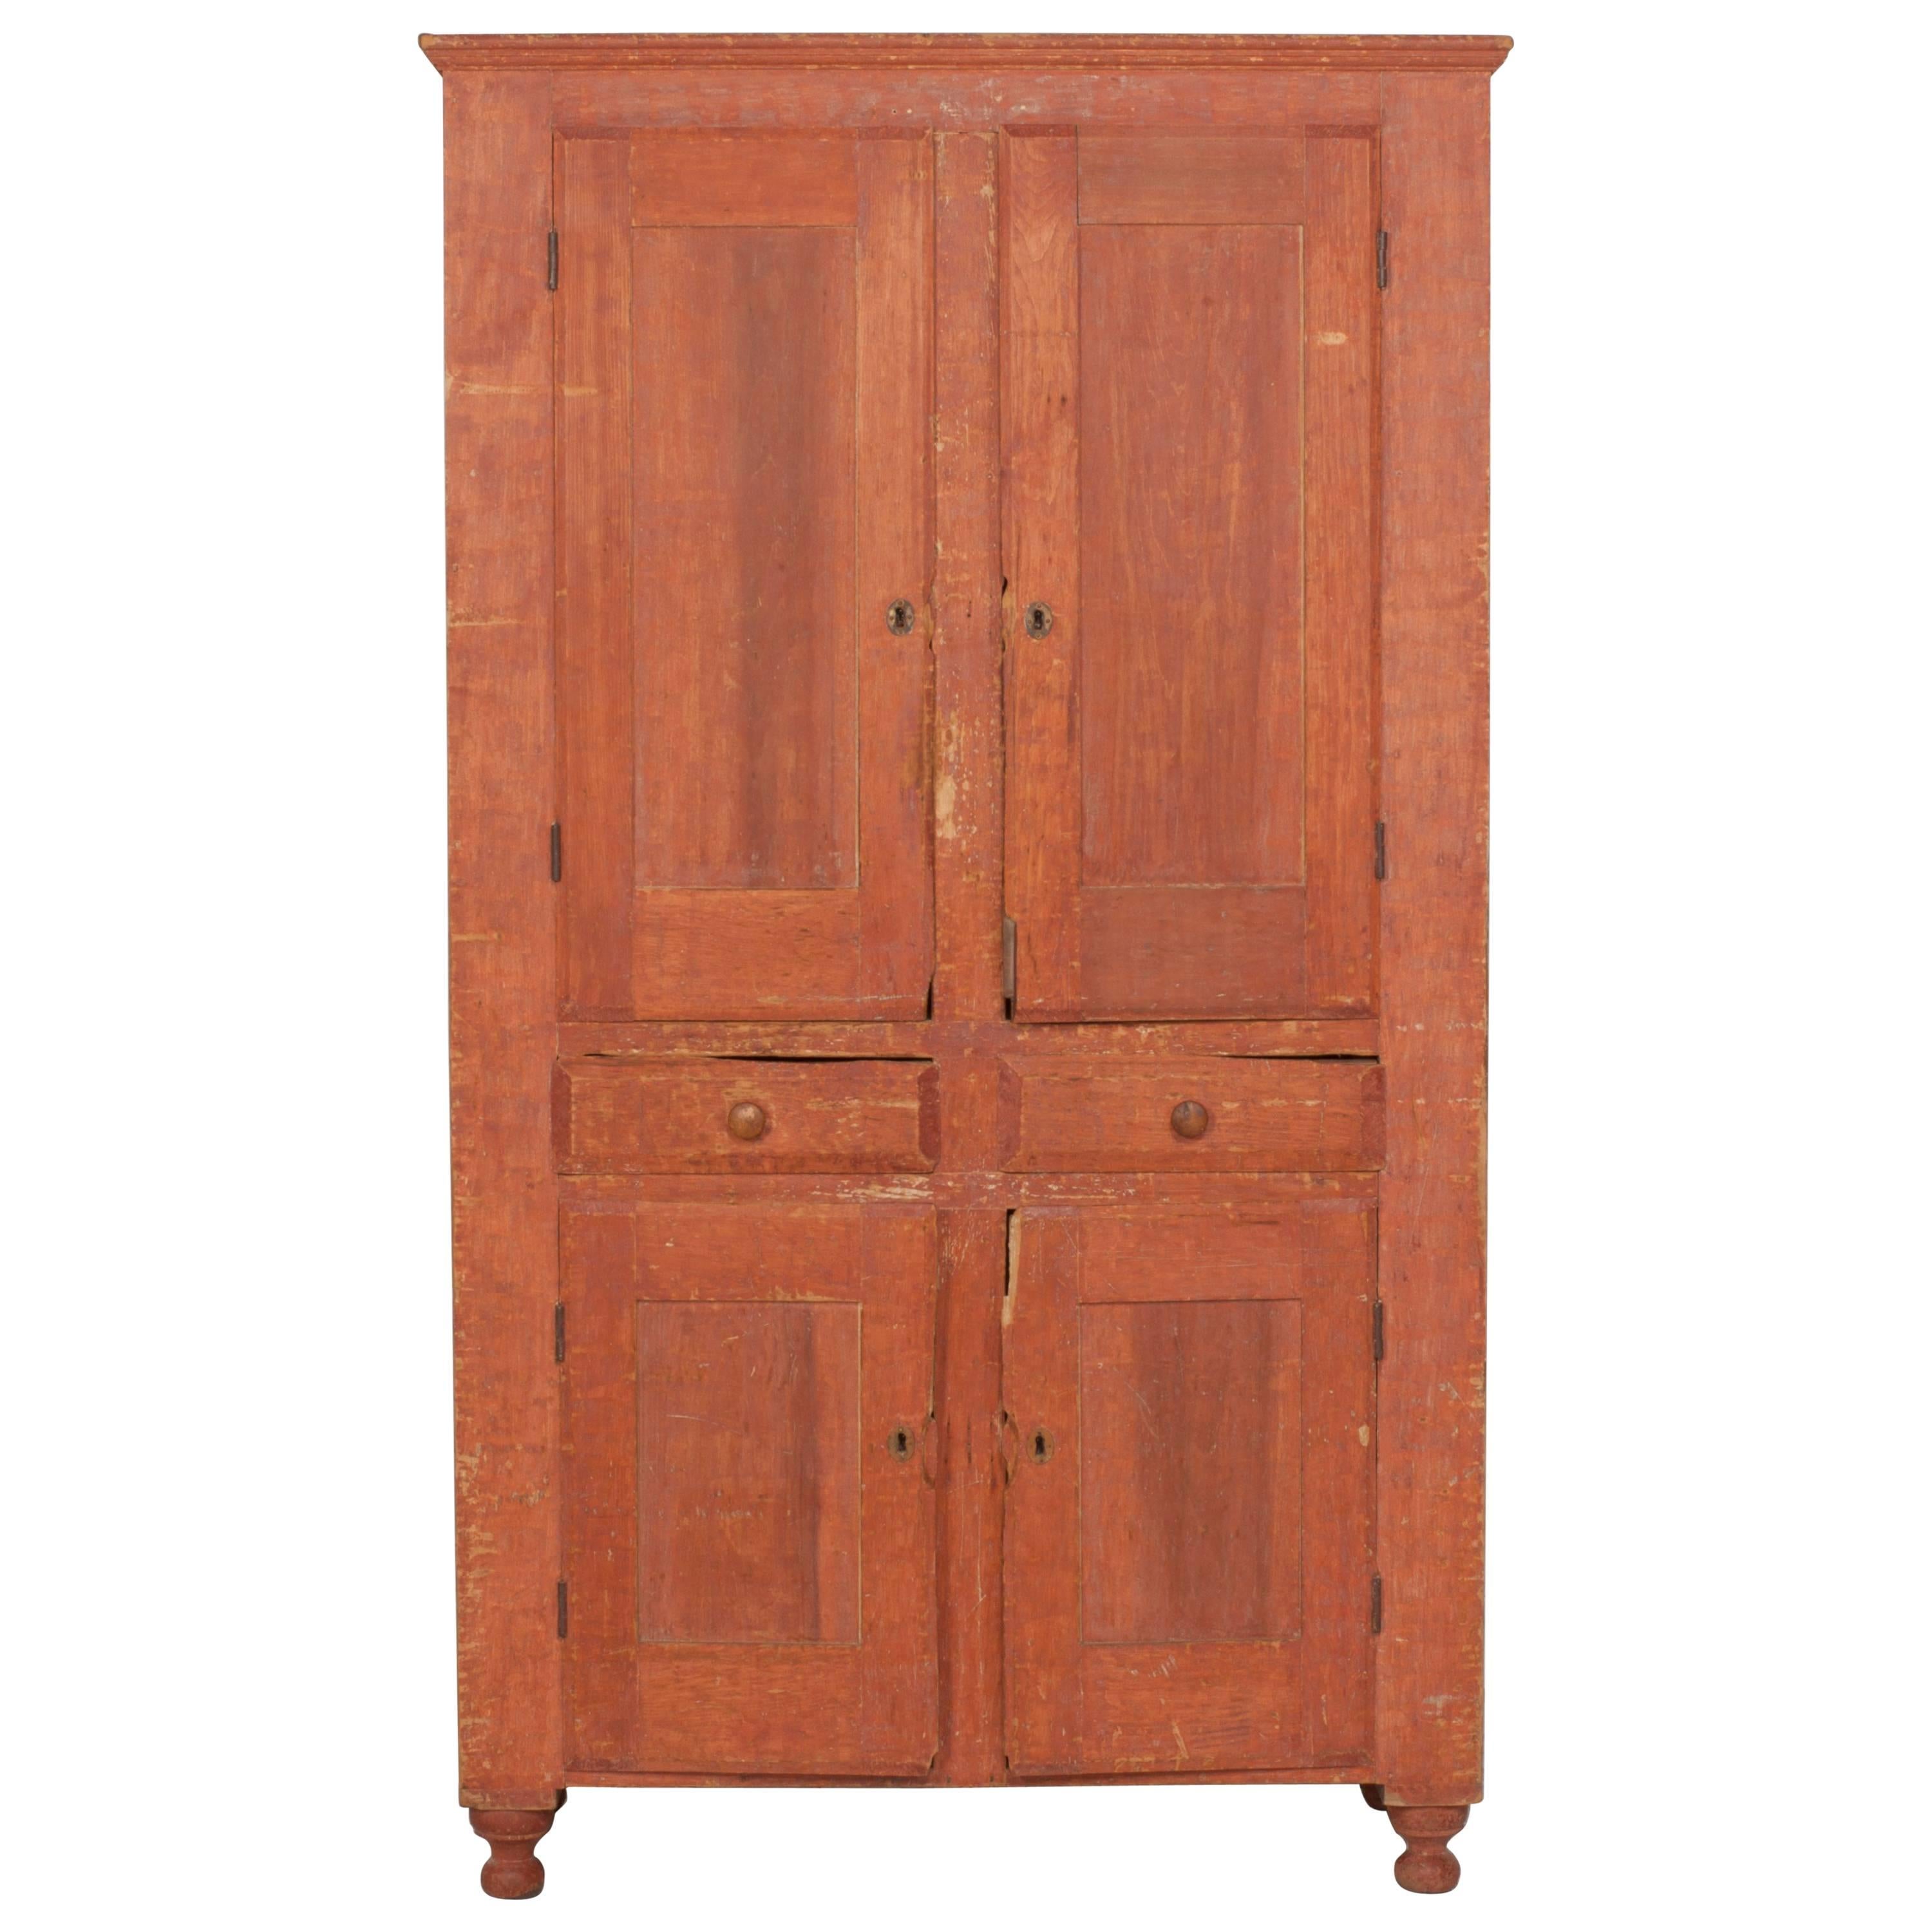 Early American Terra Cotta Stained Cabinet with Four Doors and Two Drawers